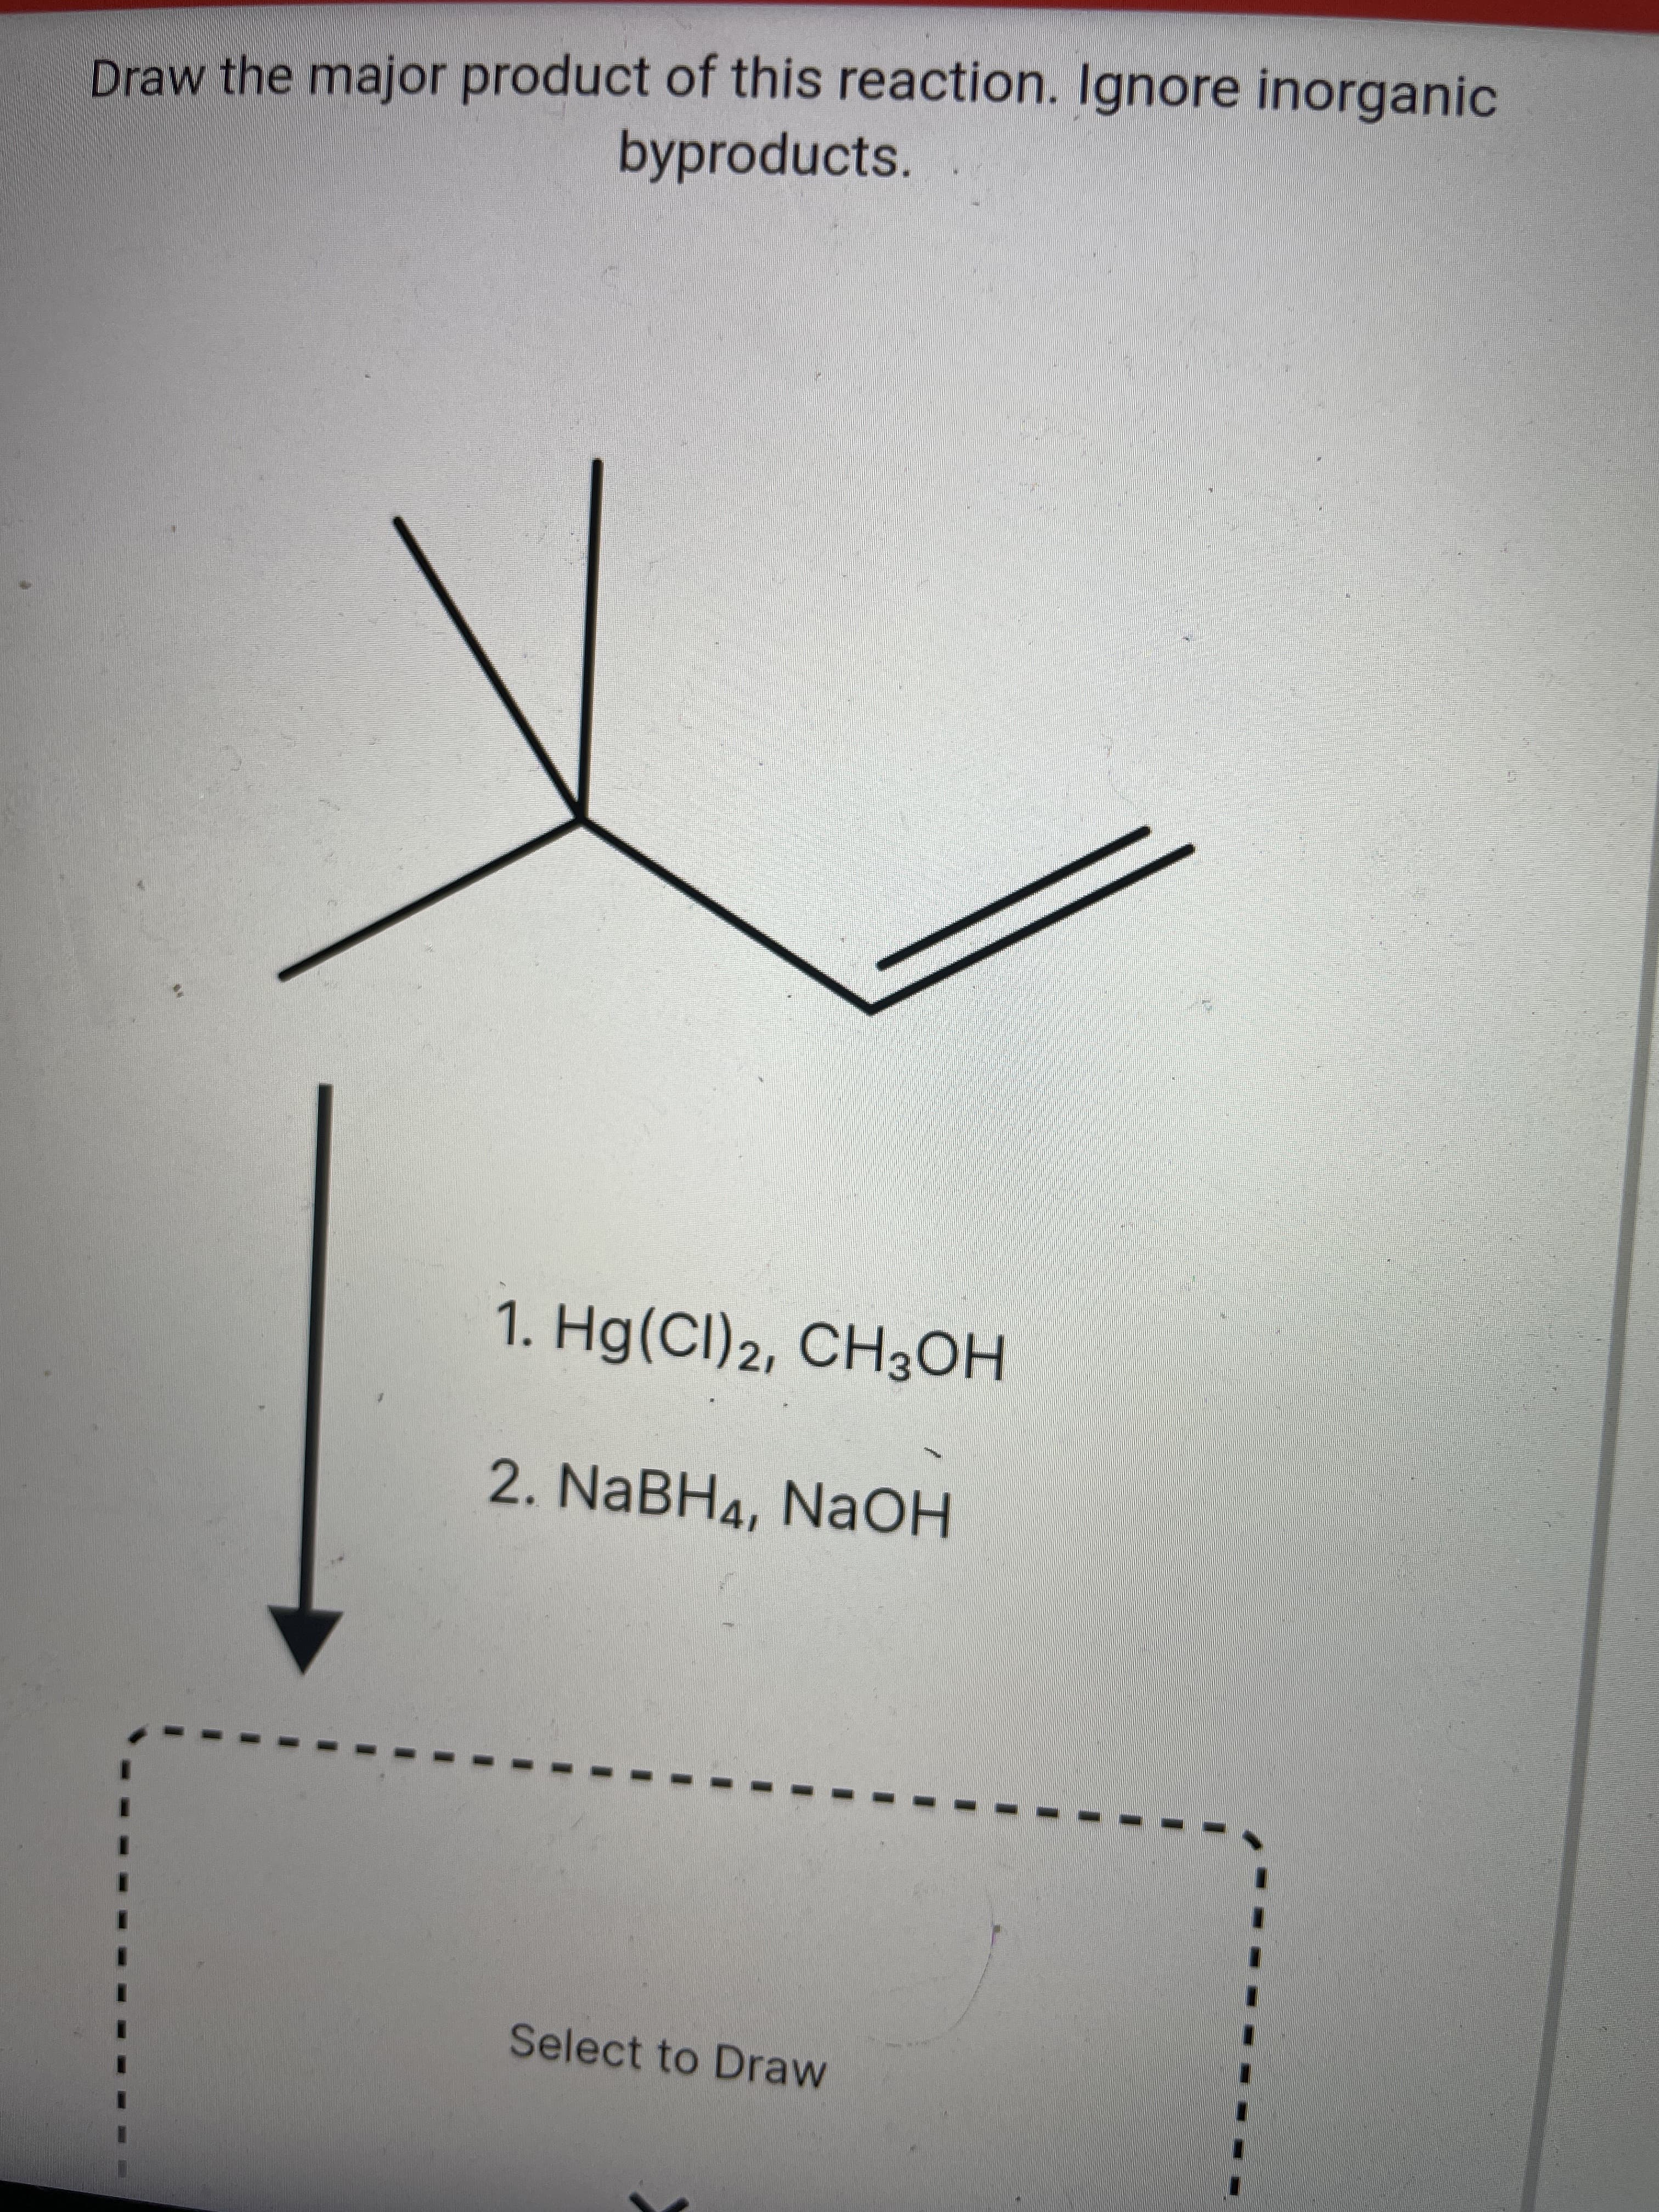 Draw the major product of this reaction. Ignore inorganic
byproducts.
1. Hg(Cl)2, CH3OH
2. NABH4, NaOH
Select to Draw
